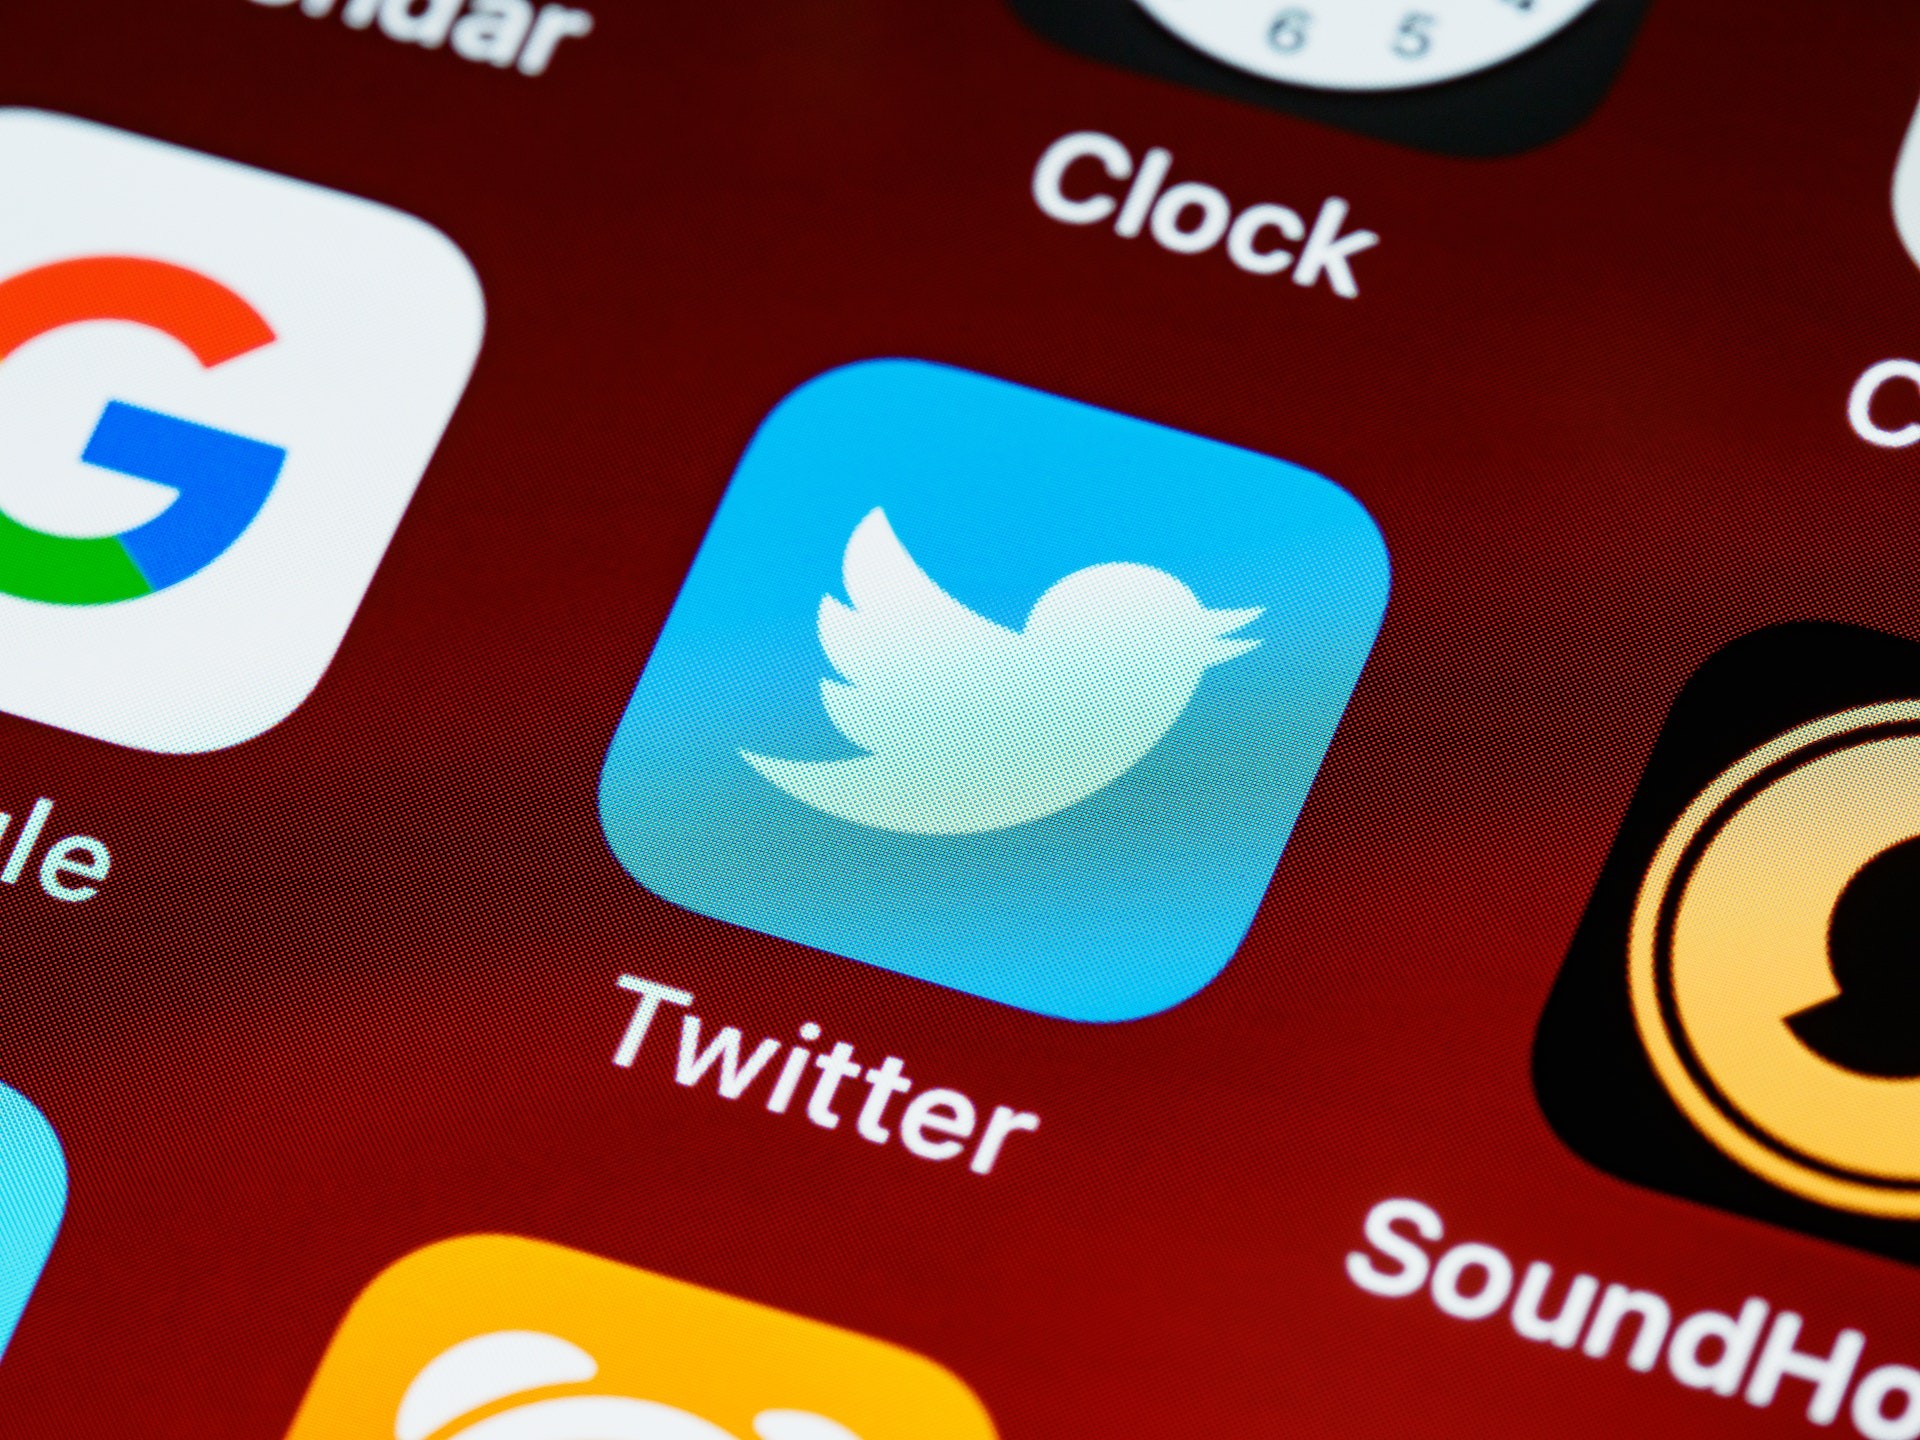 Don't Let Your Dependence on Twitter Cost You: The Importance of Omnichannel approach